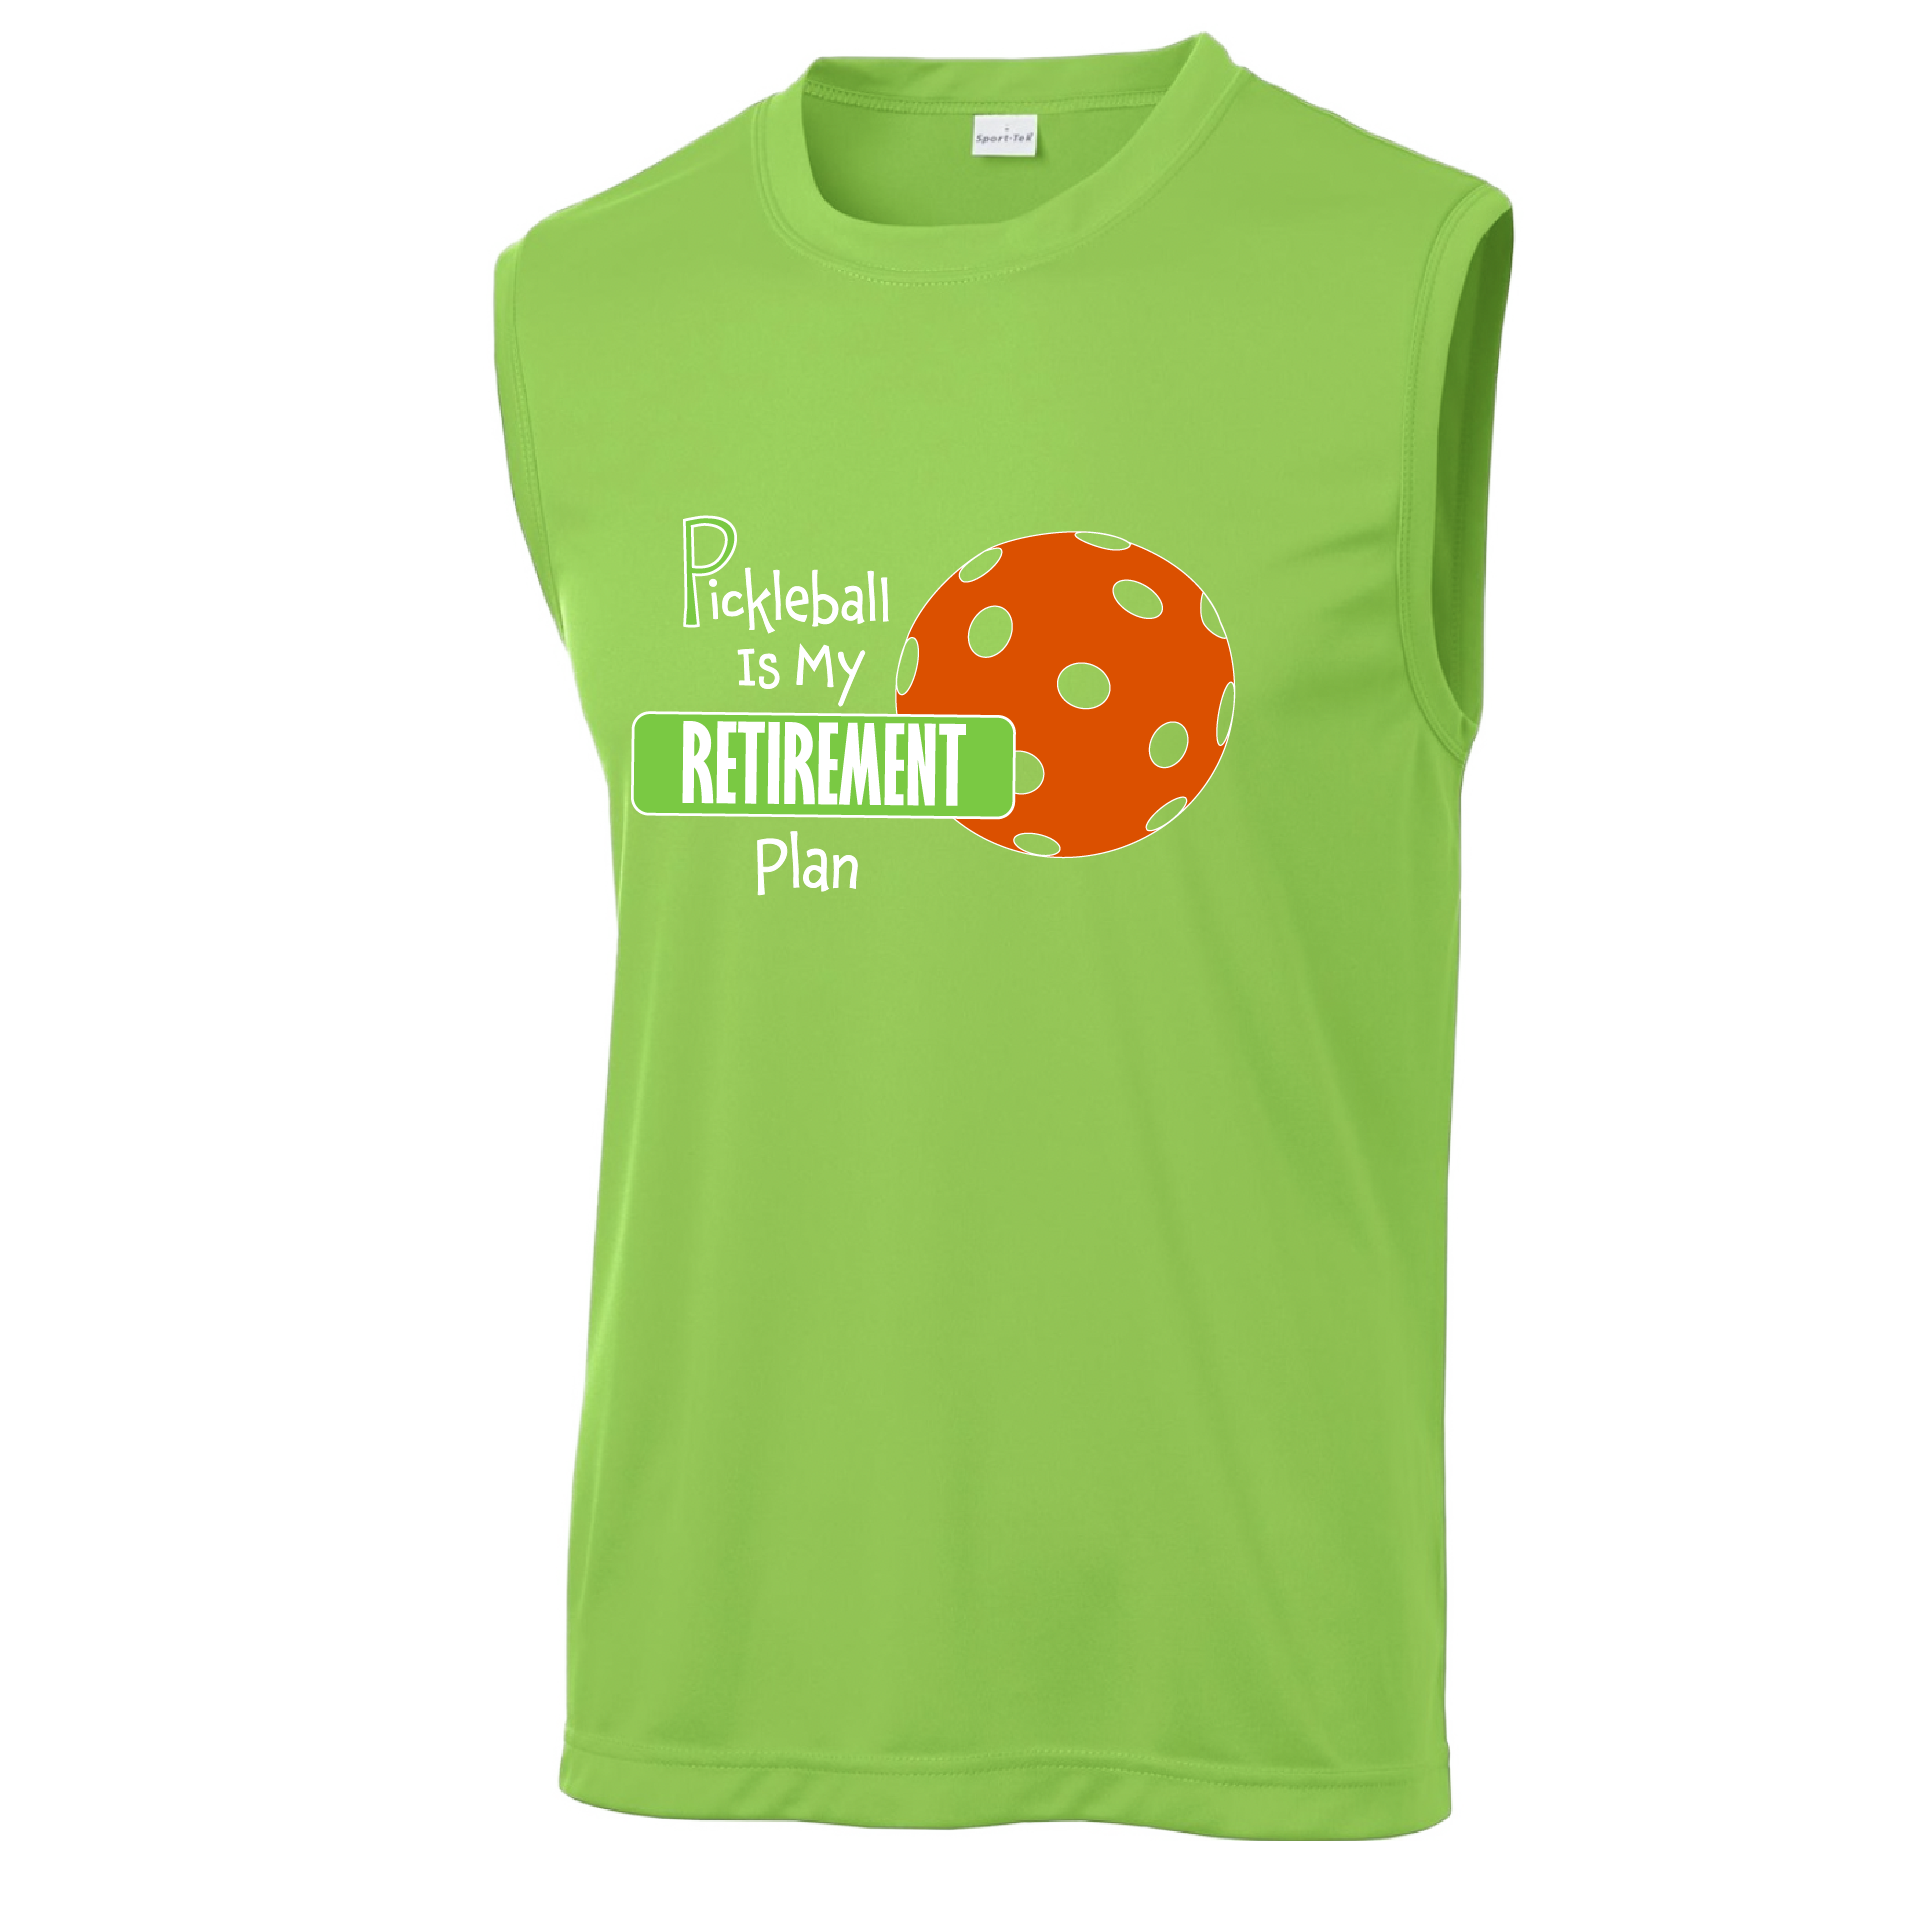 Pickleball Design: Pickleball is my Retirement Plan  Men's Style: Sleeveless  Shirts are lightweight, roomy and highly breathable. These moisture-wicking shirts are designed for athletic performance. They feature PosiCharge technology to lock in color and prevent logos from fading. Removable tag and set-in sleeves for comfort.